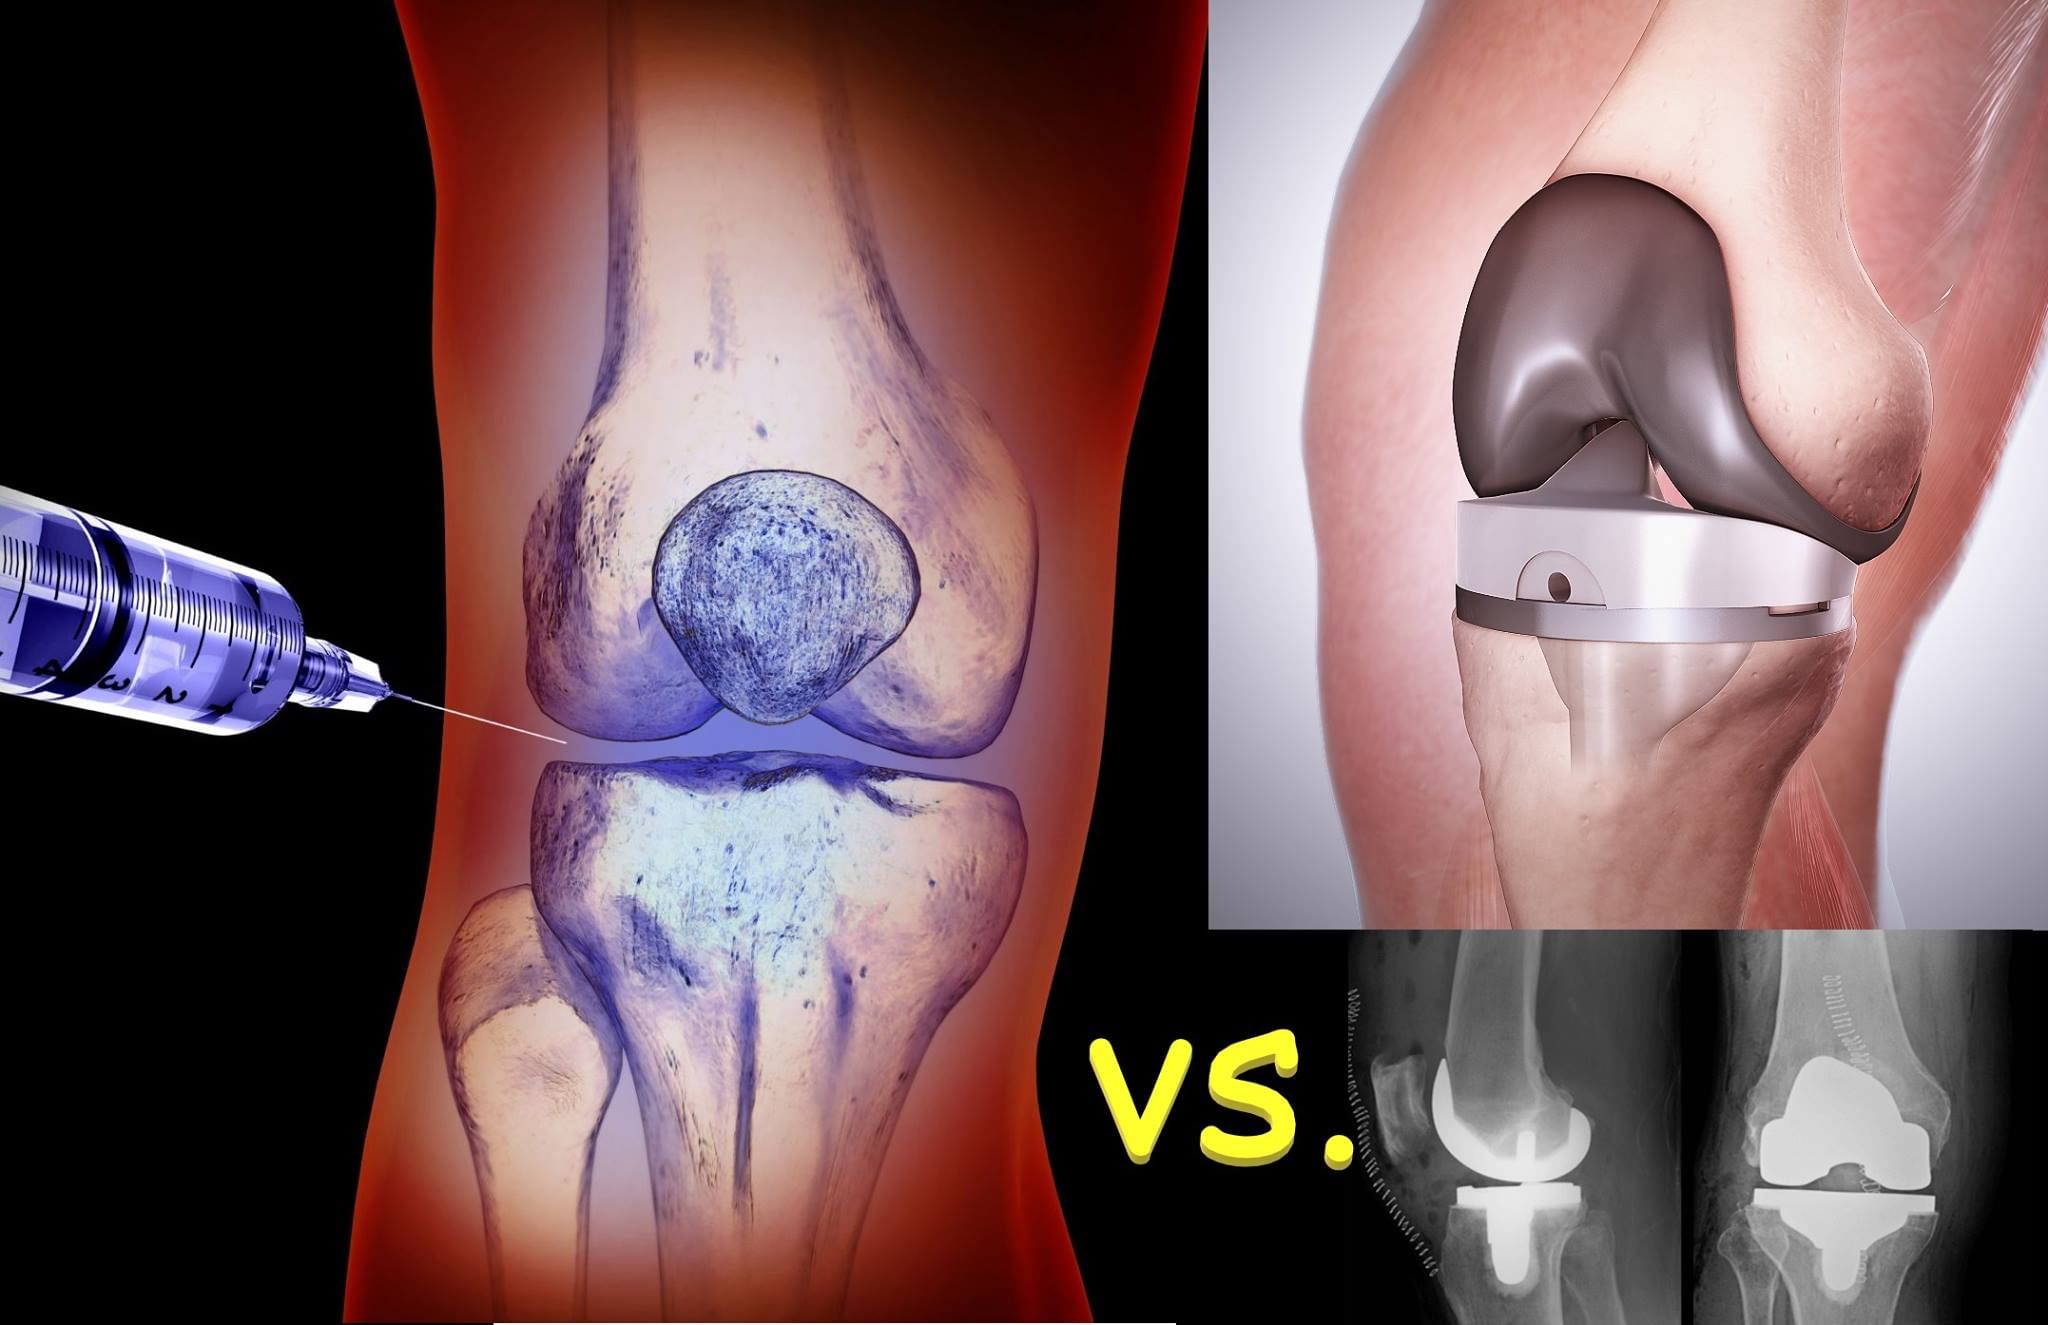 What Is Best - Knee Injections Or Knee Replacement?